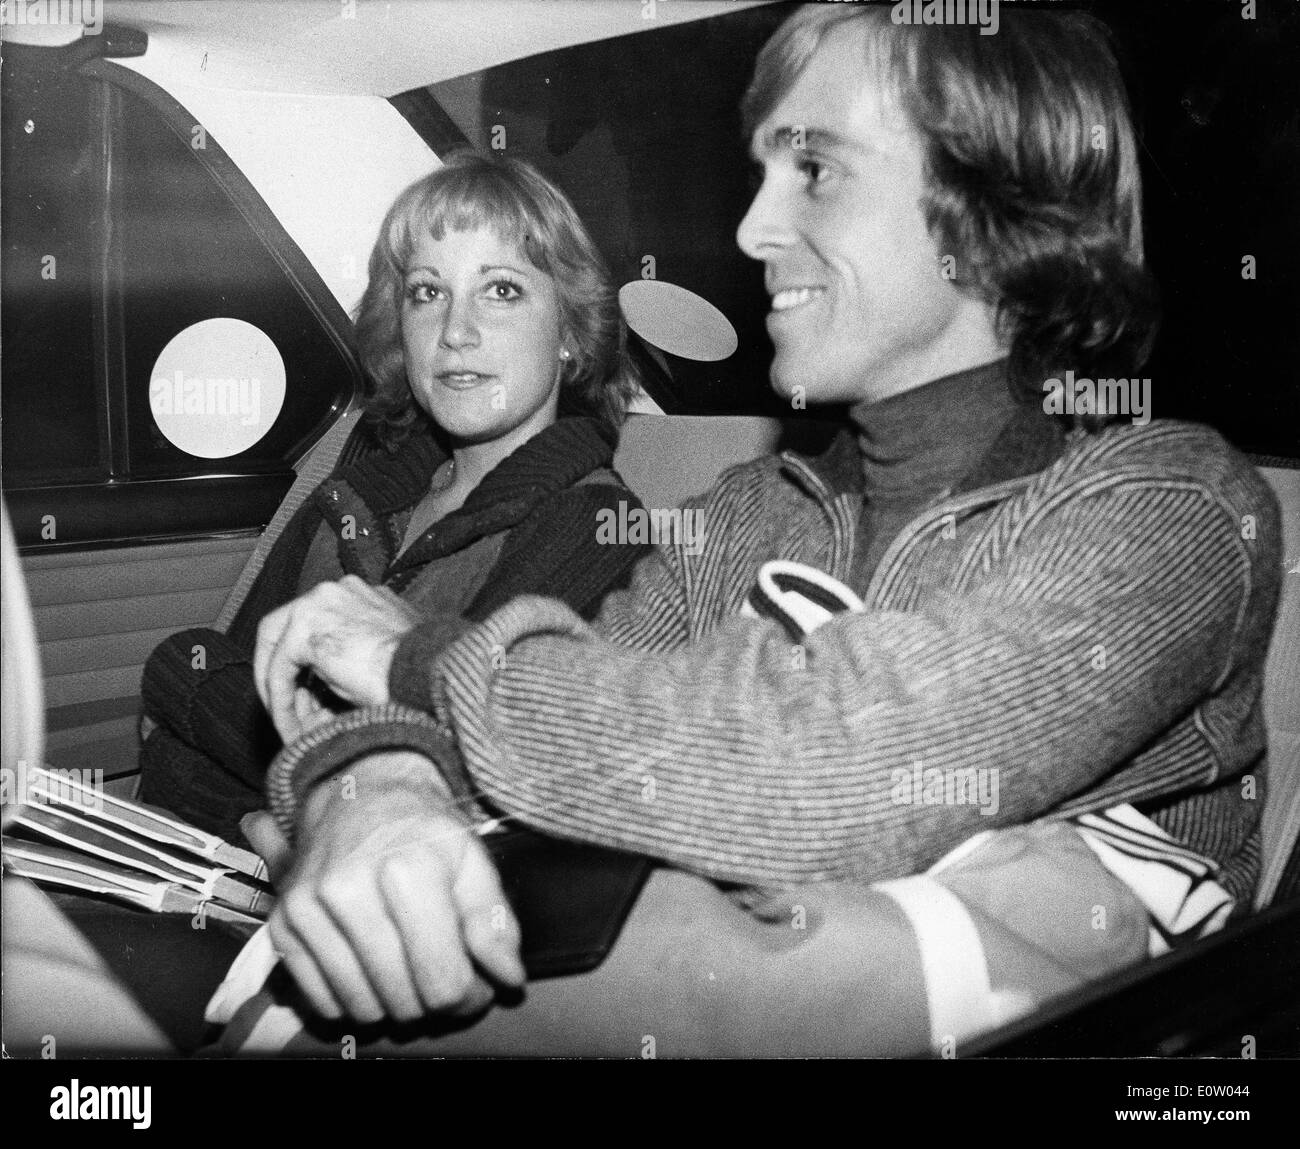 Roddy Llewellyn in the car with a woman Stock Photo